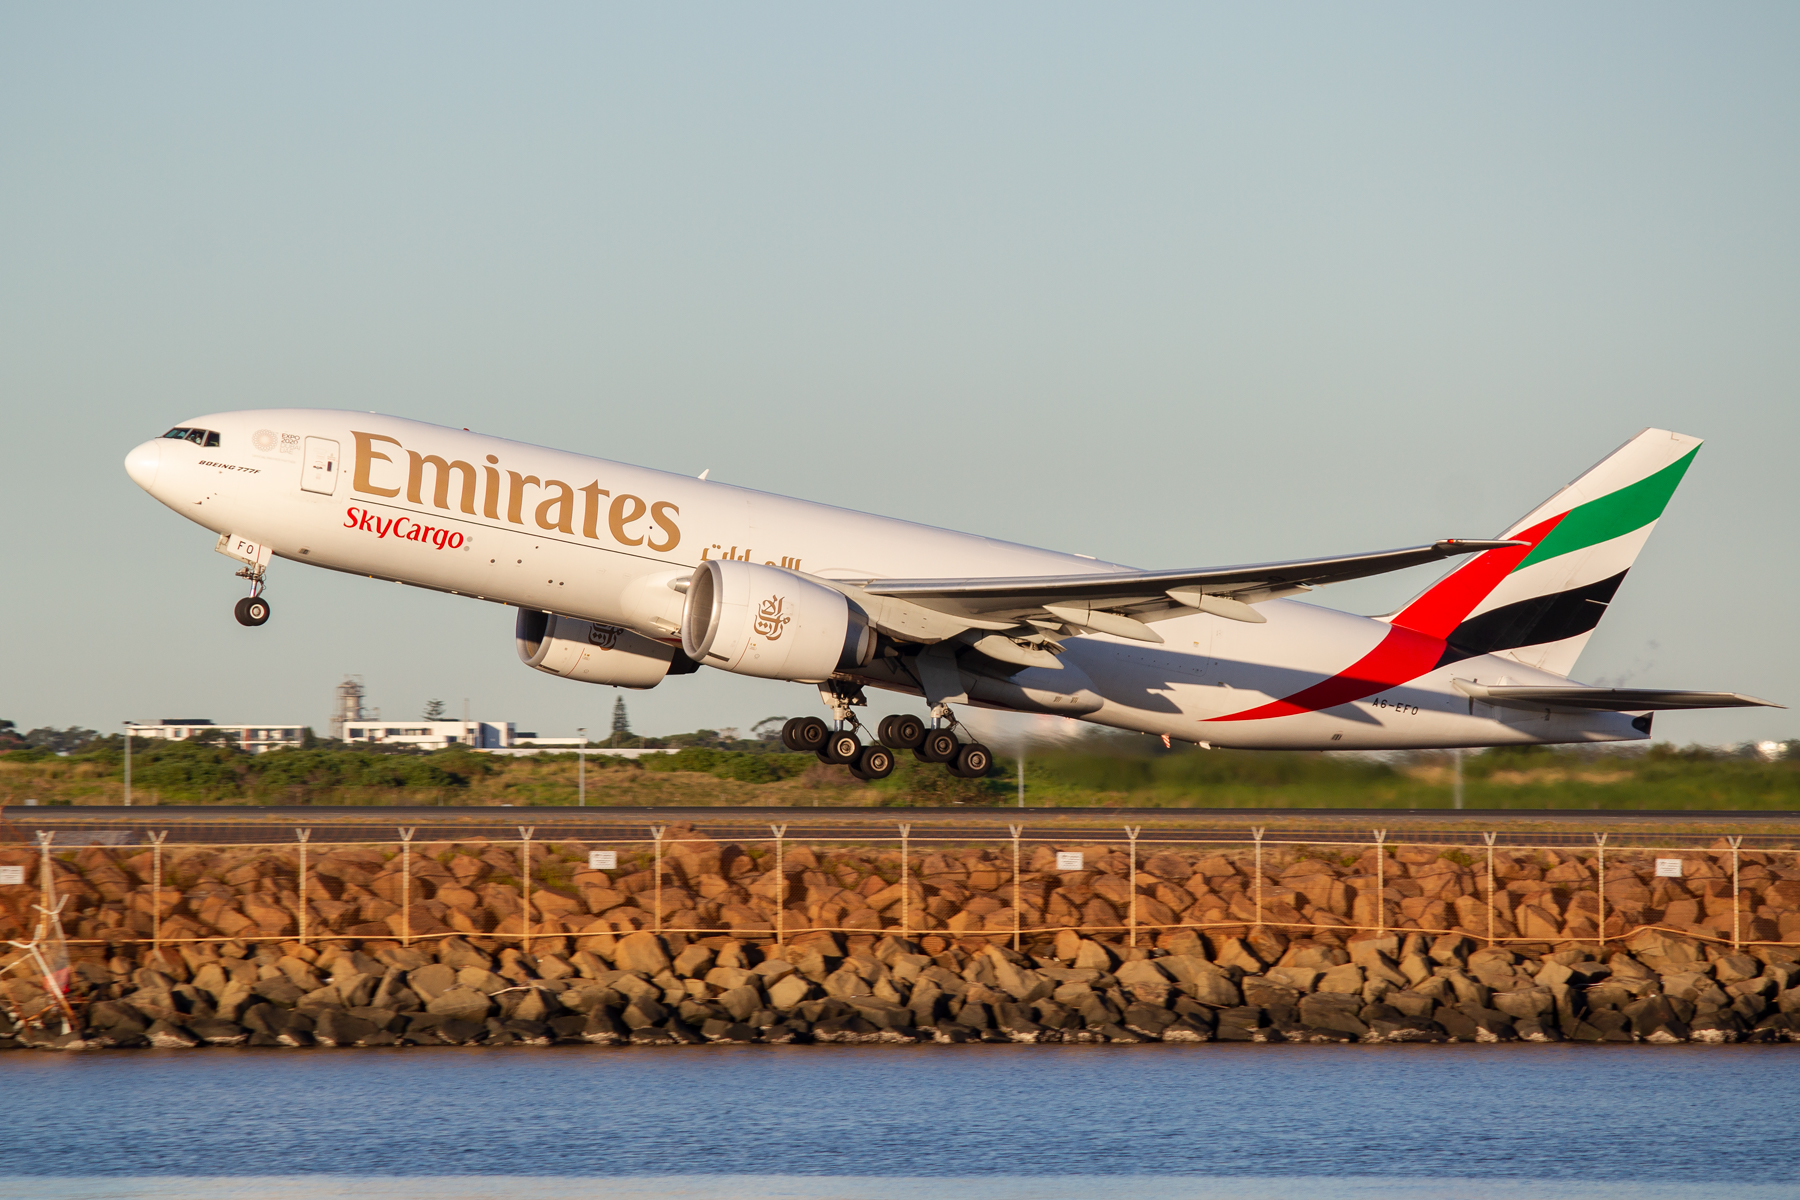 Emirates Airlines Boeing 777-200F A6-EFO at Kingsford Smith